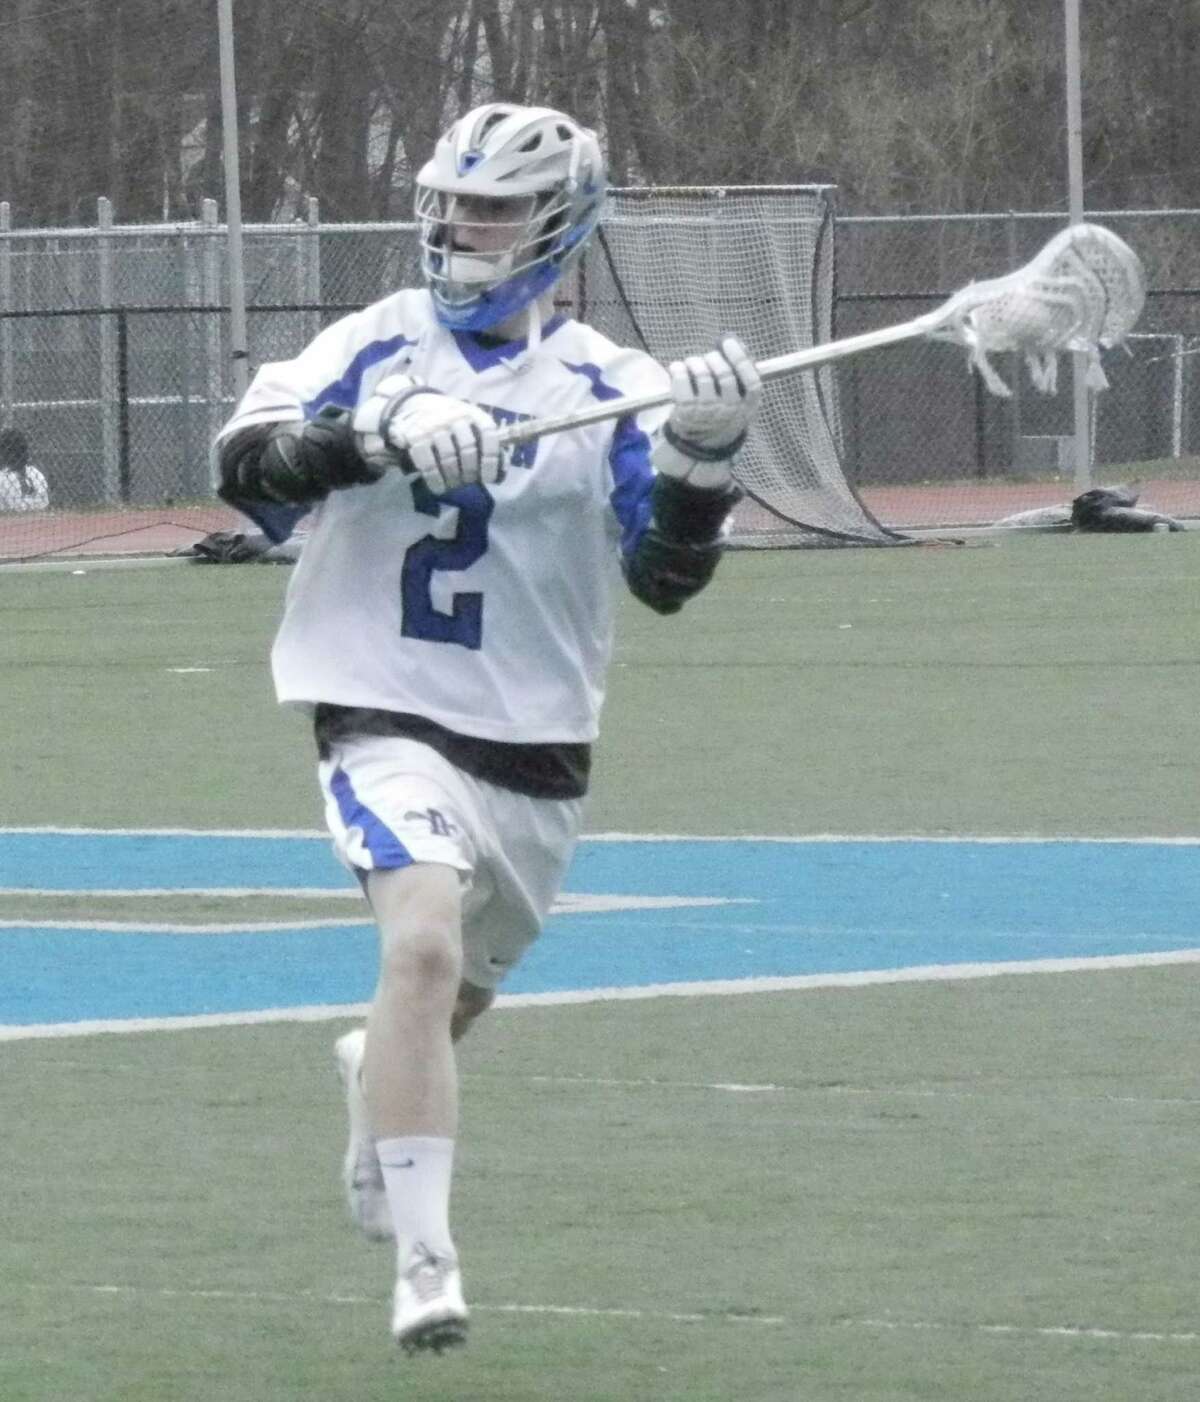 Will Hamernick, of Dairen, has control in an FCIAC boys lacrosse game on Tuesday, April 22. The Blue Wave defeated Fairfield Warde 12-5.